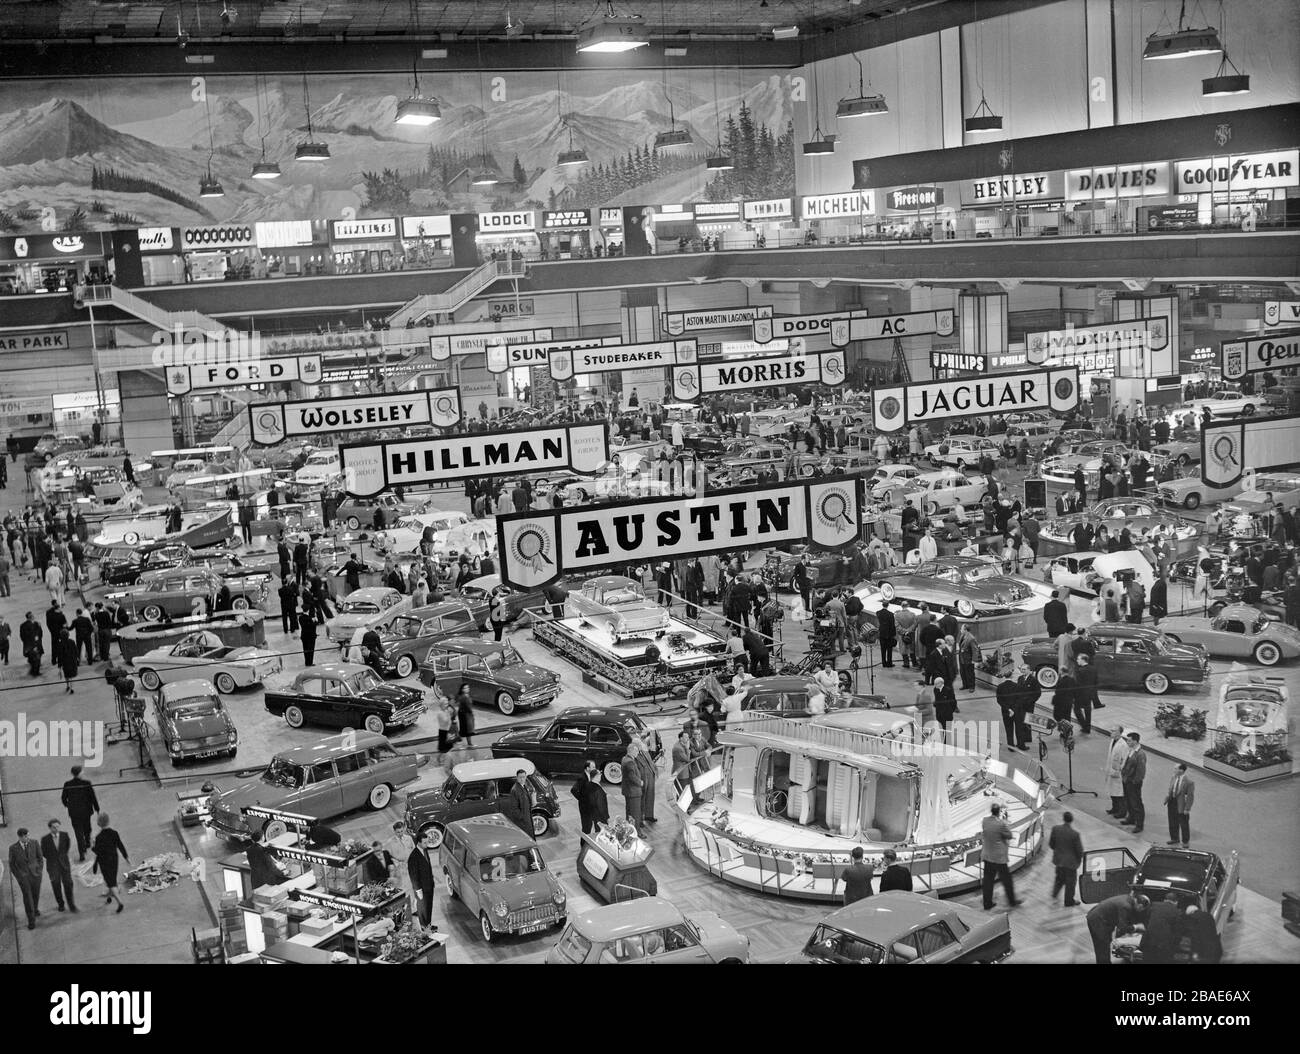 Vintage black and white photograph showing a view of the London Motor Show at Earls Court in 1961. Manufacturers visible include Jaguar, Austin, Hillman, Wolseley, Ford, Morris, Studebaker, Sunbeam, Vauxhall, AC, Dodge. Stock Photo